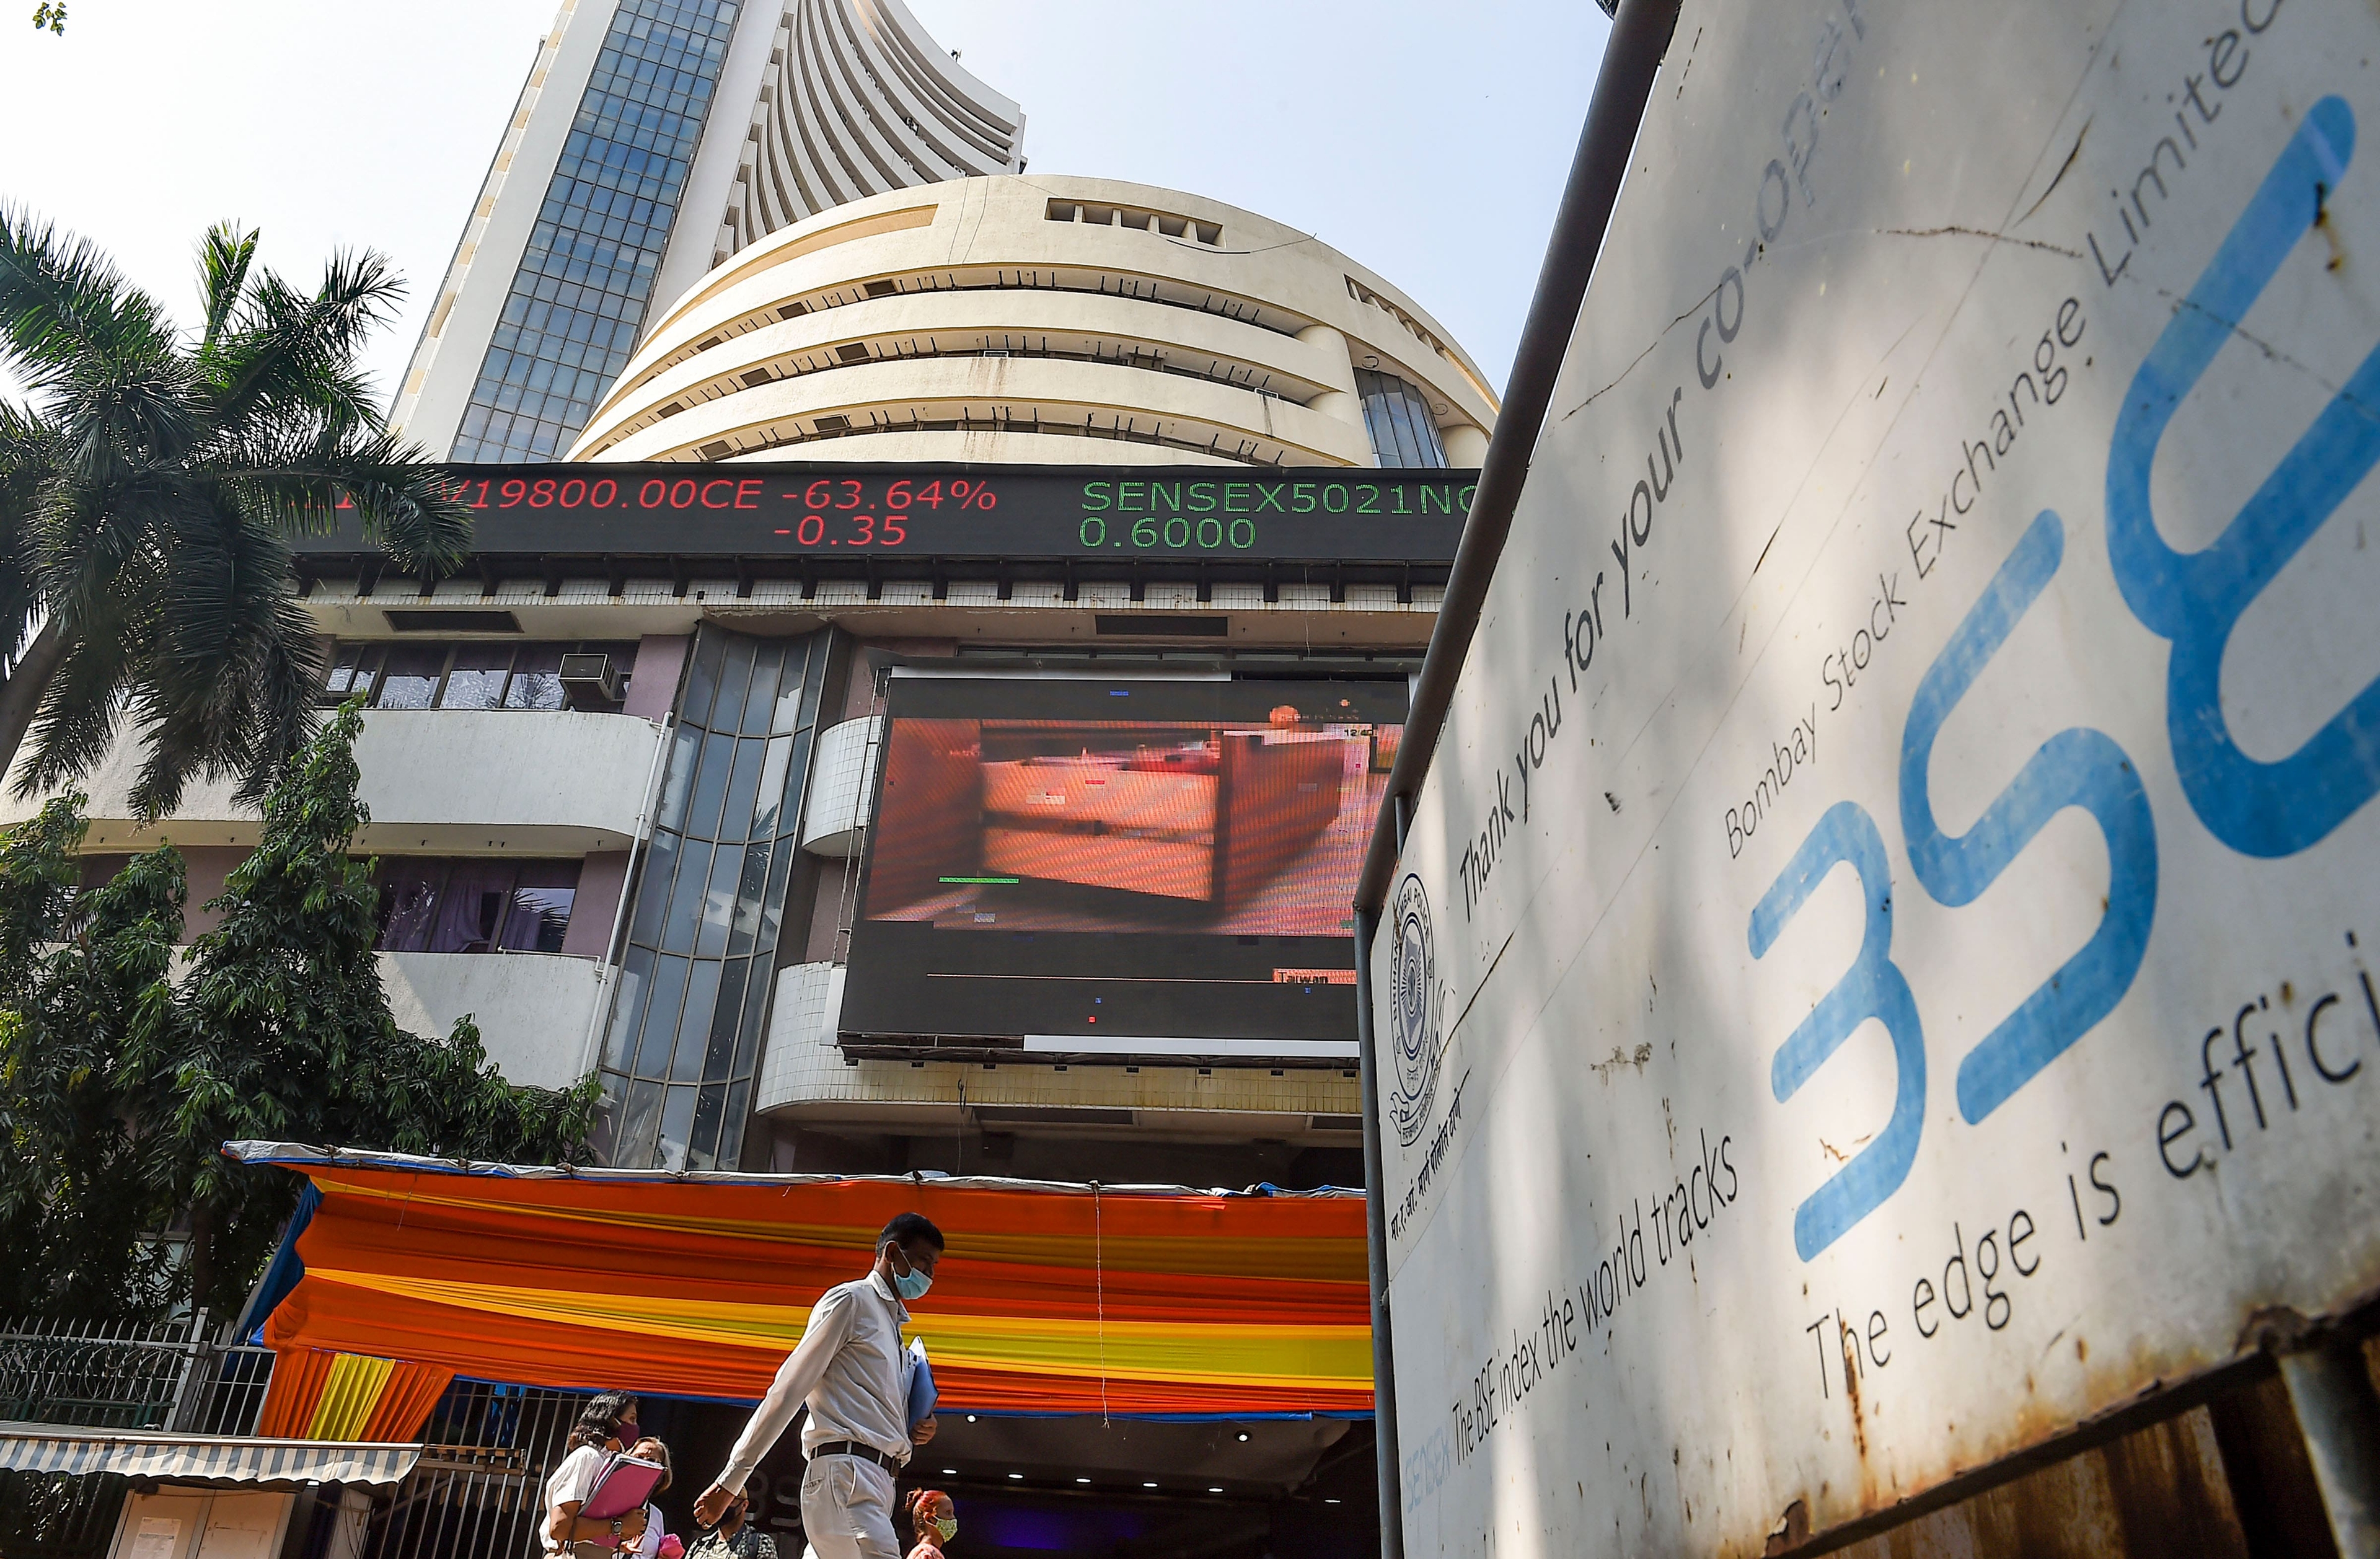 Key equity indices the Sensex and the Nifty ended in the green for the third consecutive session on March 30 as reports of talks between Russia and Ukraine continued underpinning market sentiment, boosting hopes that an end to the ongoing war was near. Sensex closed 740 points, 1.28 percent, higher at 58,683.99 while the Nifty settled with a gain of 173 points, or 1 percent, at 17,498.25.